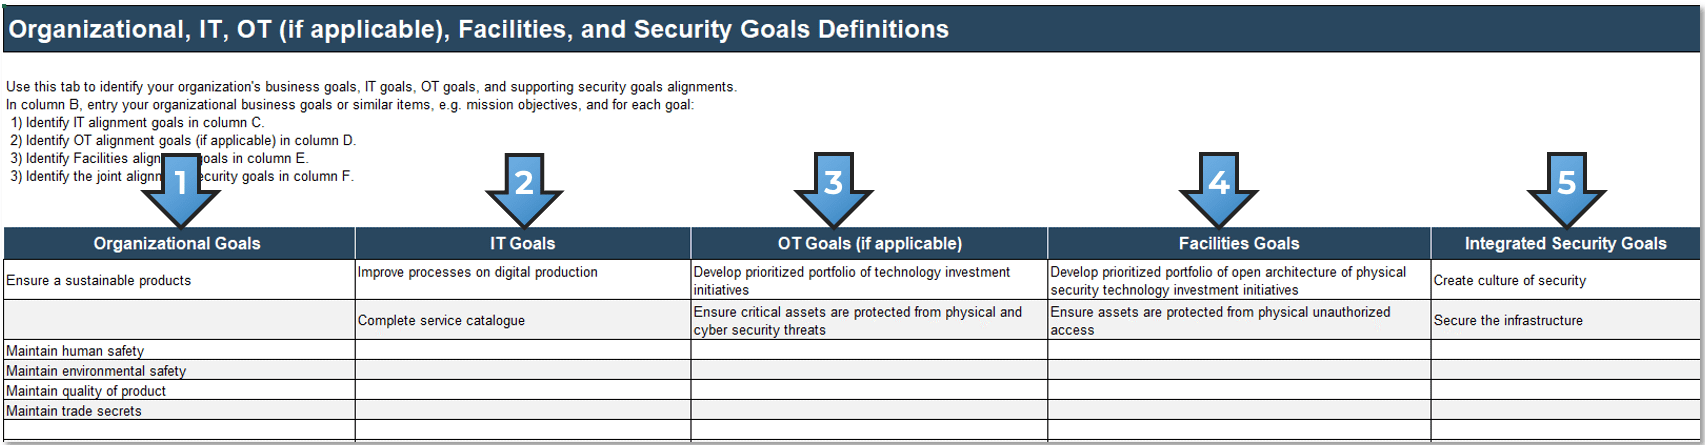 A table to identify Organization, IT, OT(if applicable), Facilities, and Security Goals Definitions.